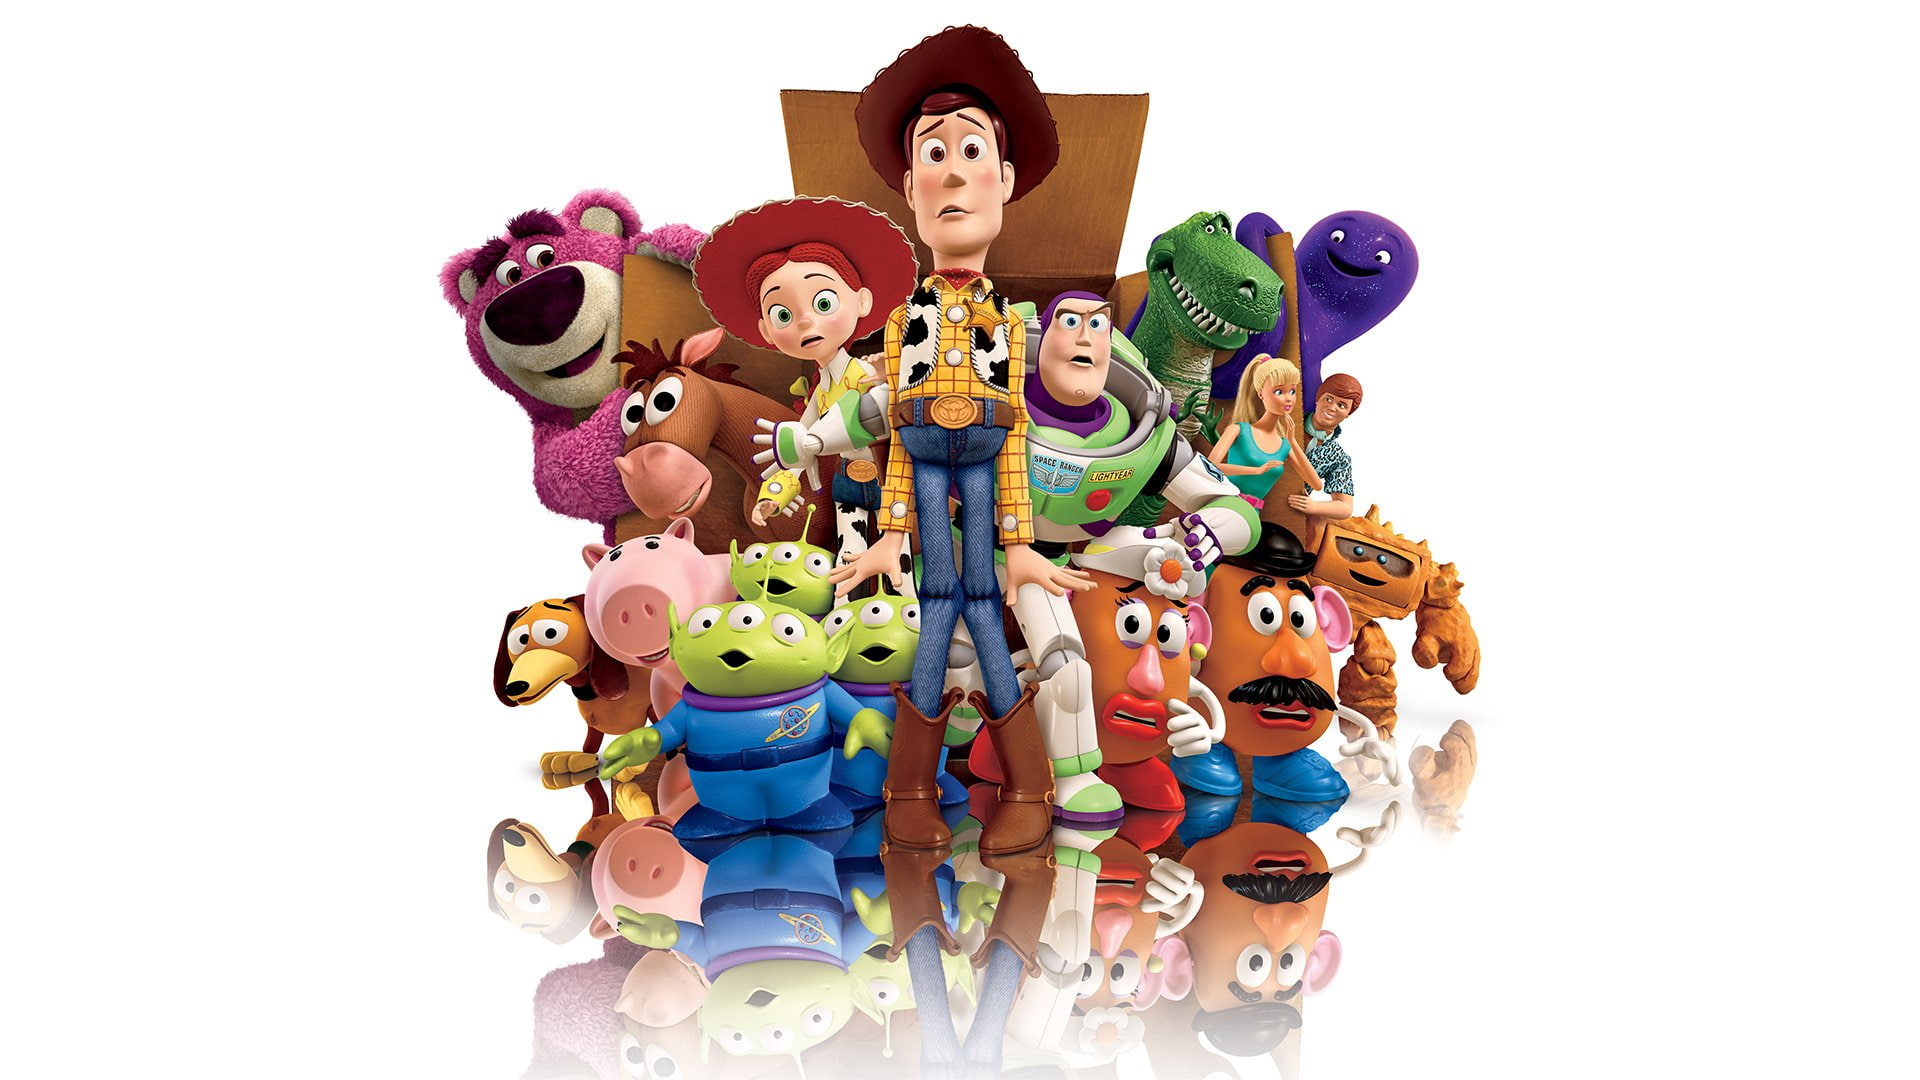 Toy Story, Toy Story 3